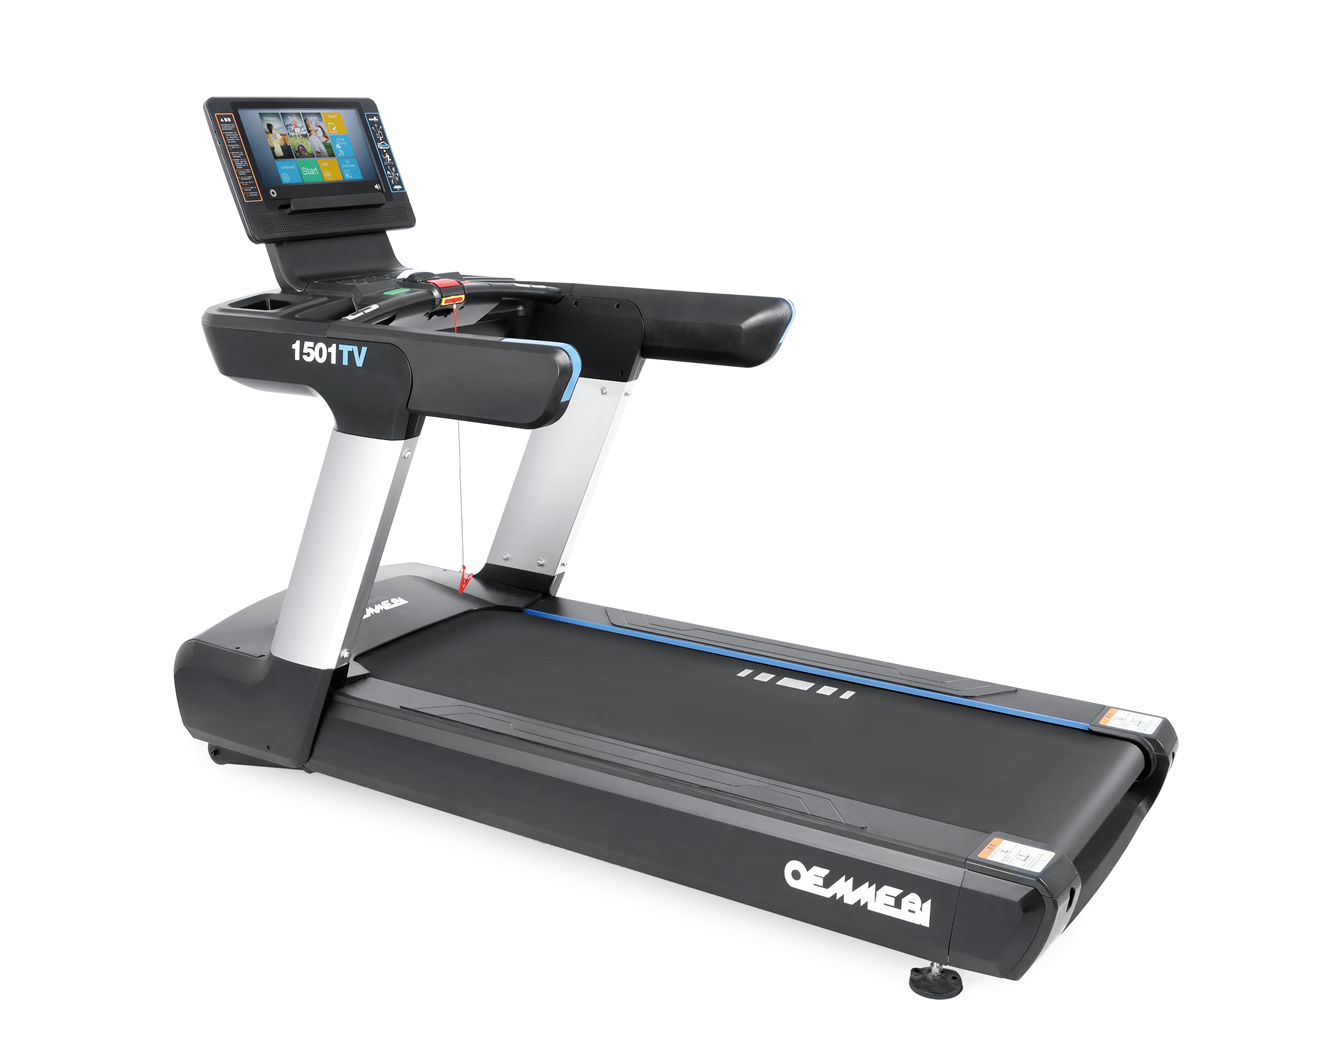 IRMT1501TV commercial luxury TFT touch screen treadmill